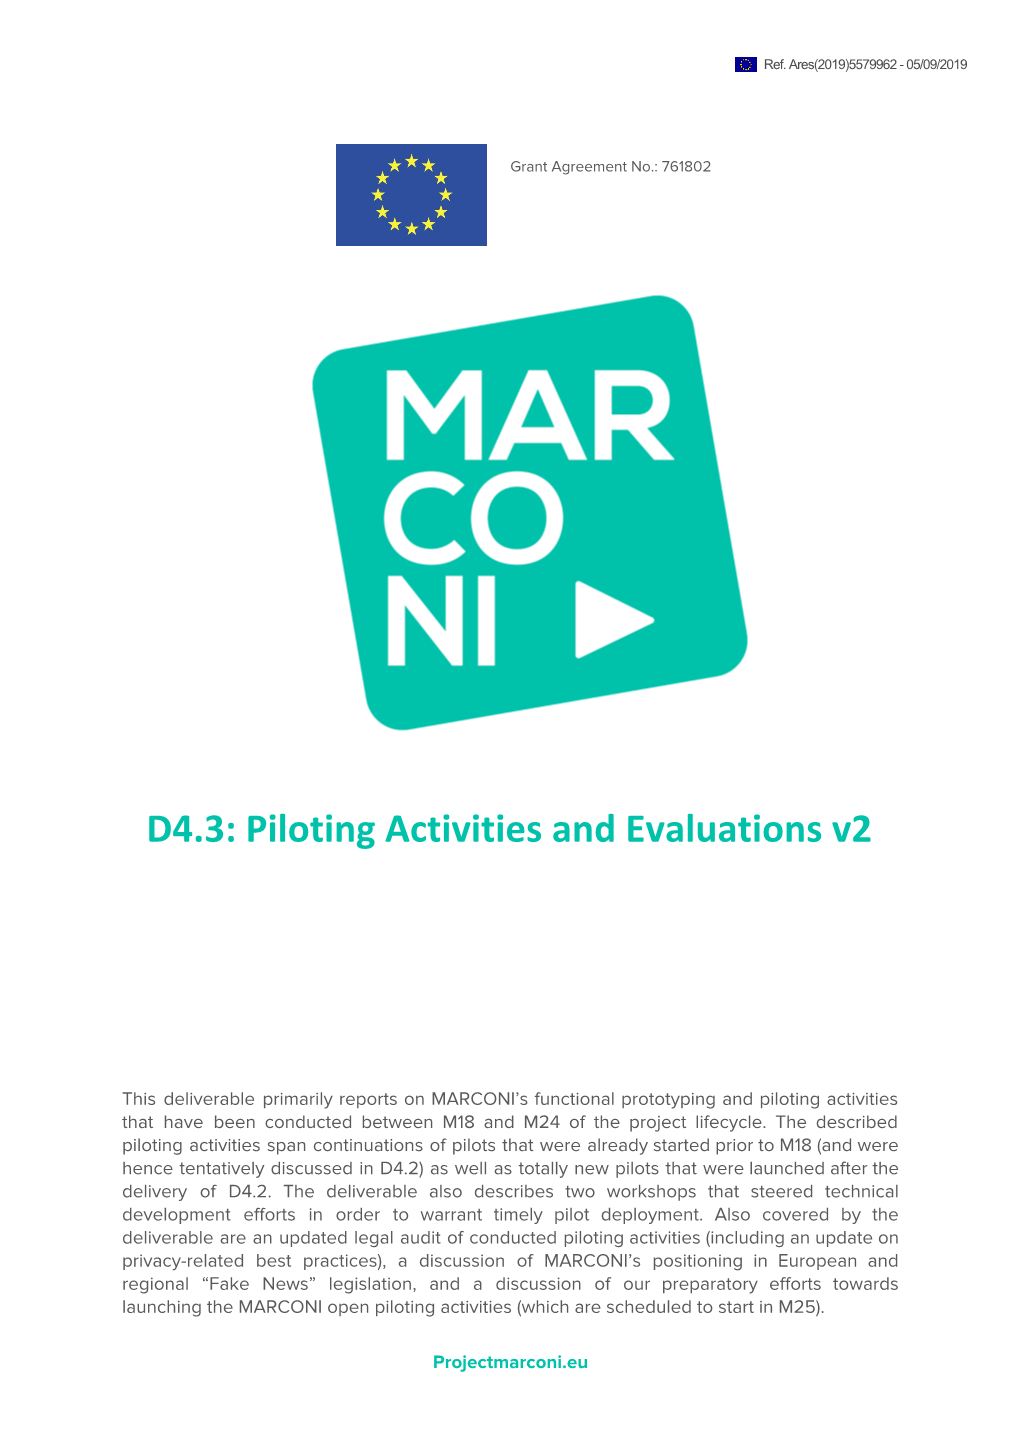 Piloting Activities and Evaluations V2